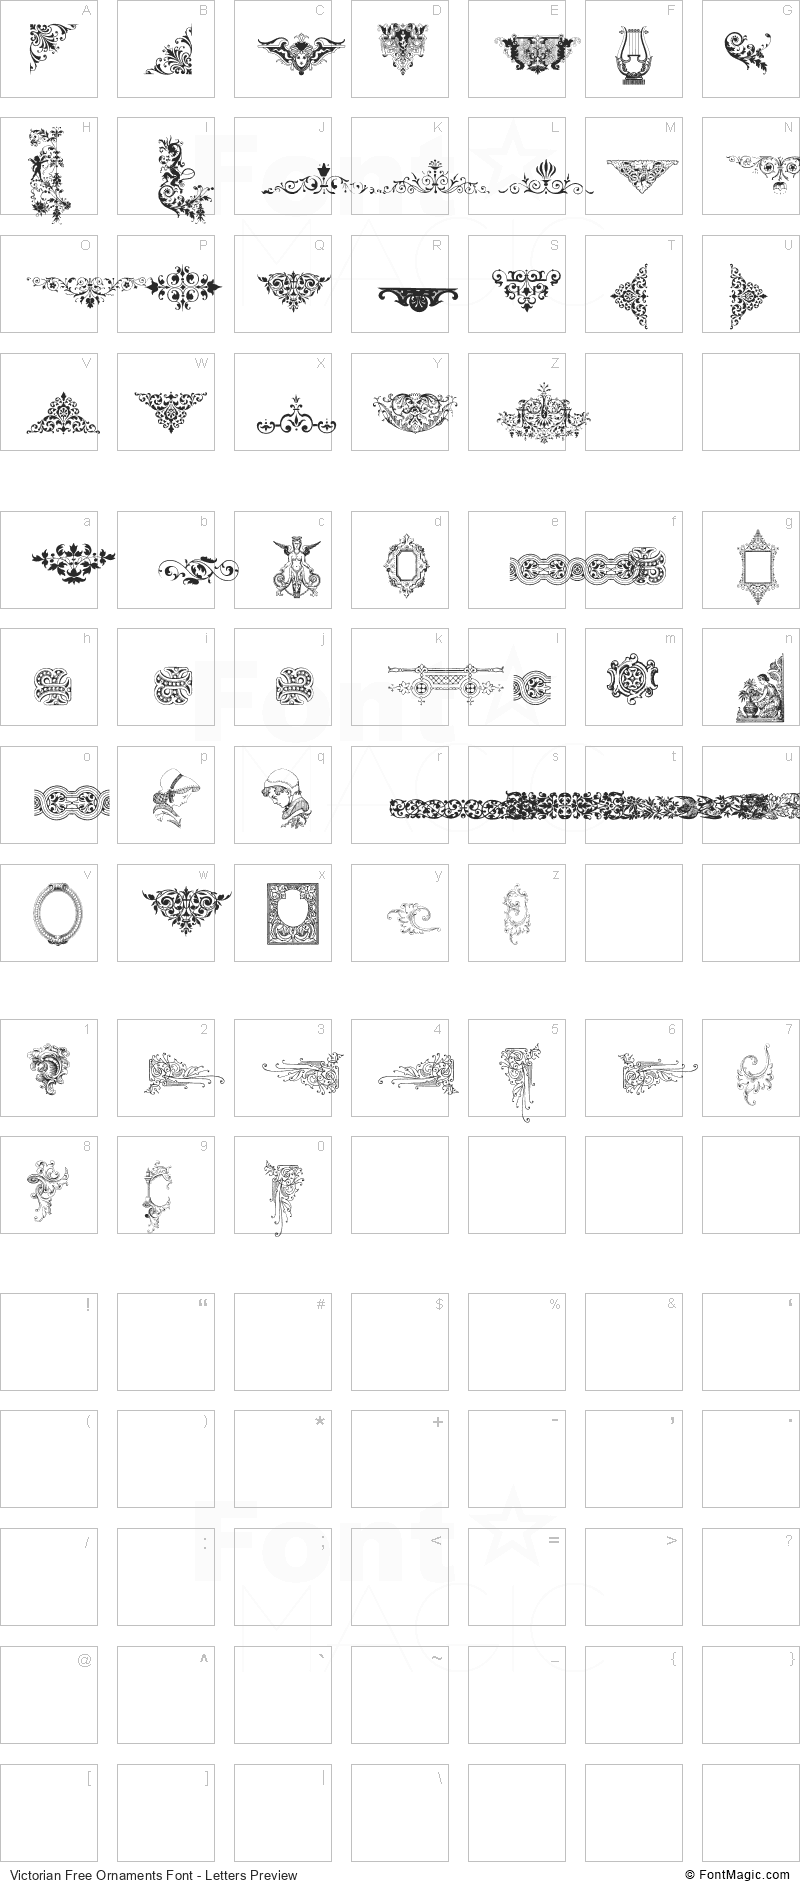 Victorian Free Ornaments Font - All Latters Preview Chart